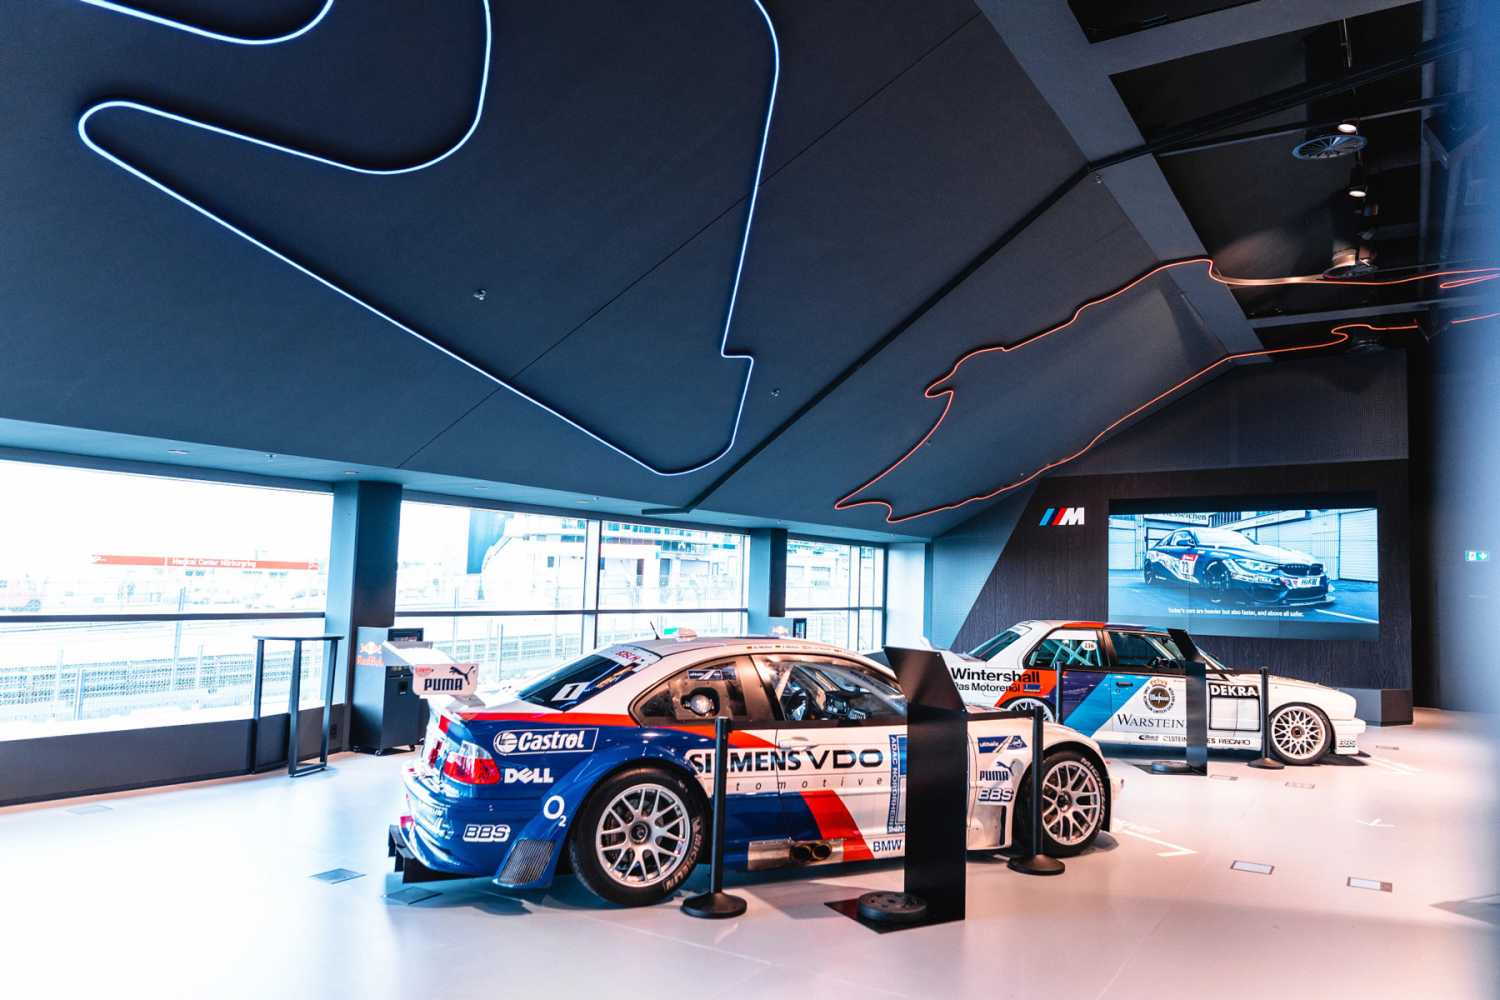 The BMW showroom in the Nürburgring motorsports complex